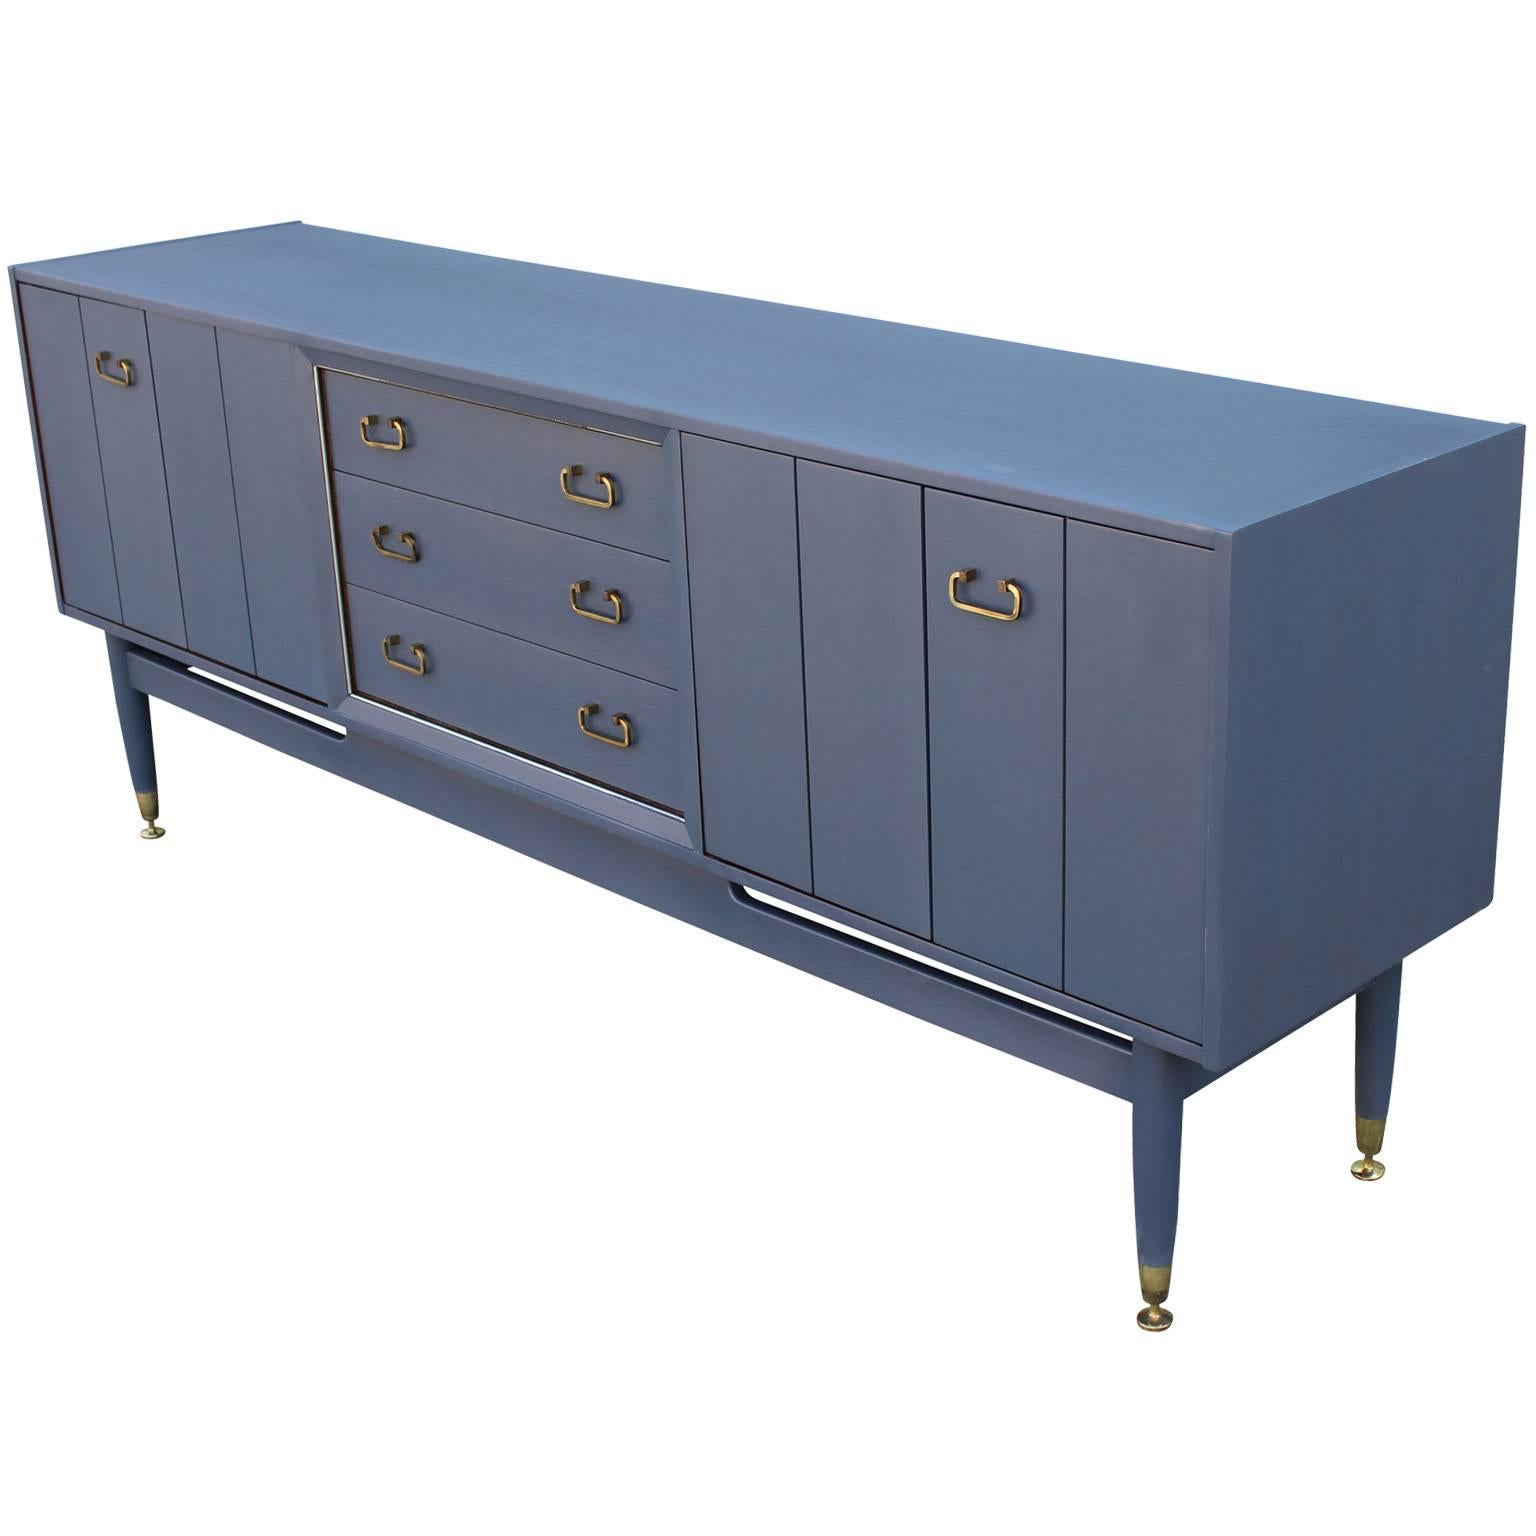 Mid-Century Modern French Blue Grey Sideboard with Shiny Brass Hardware